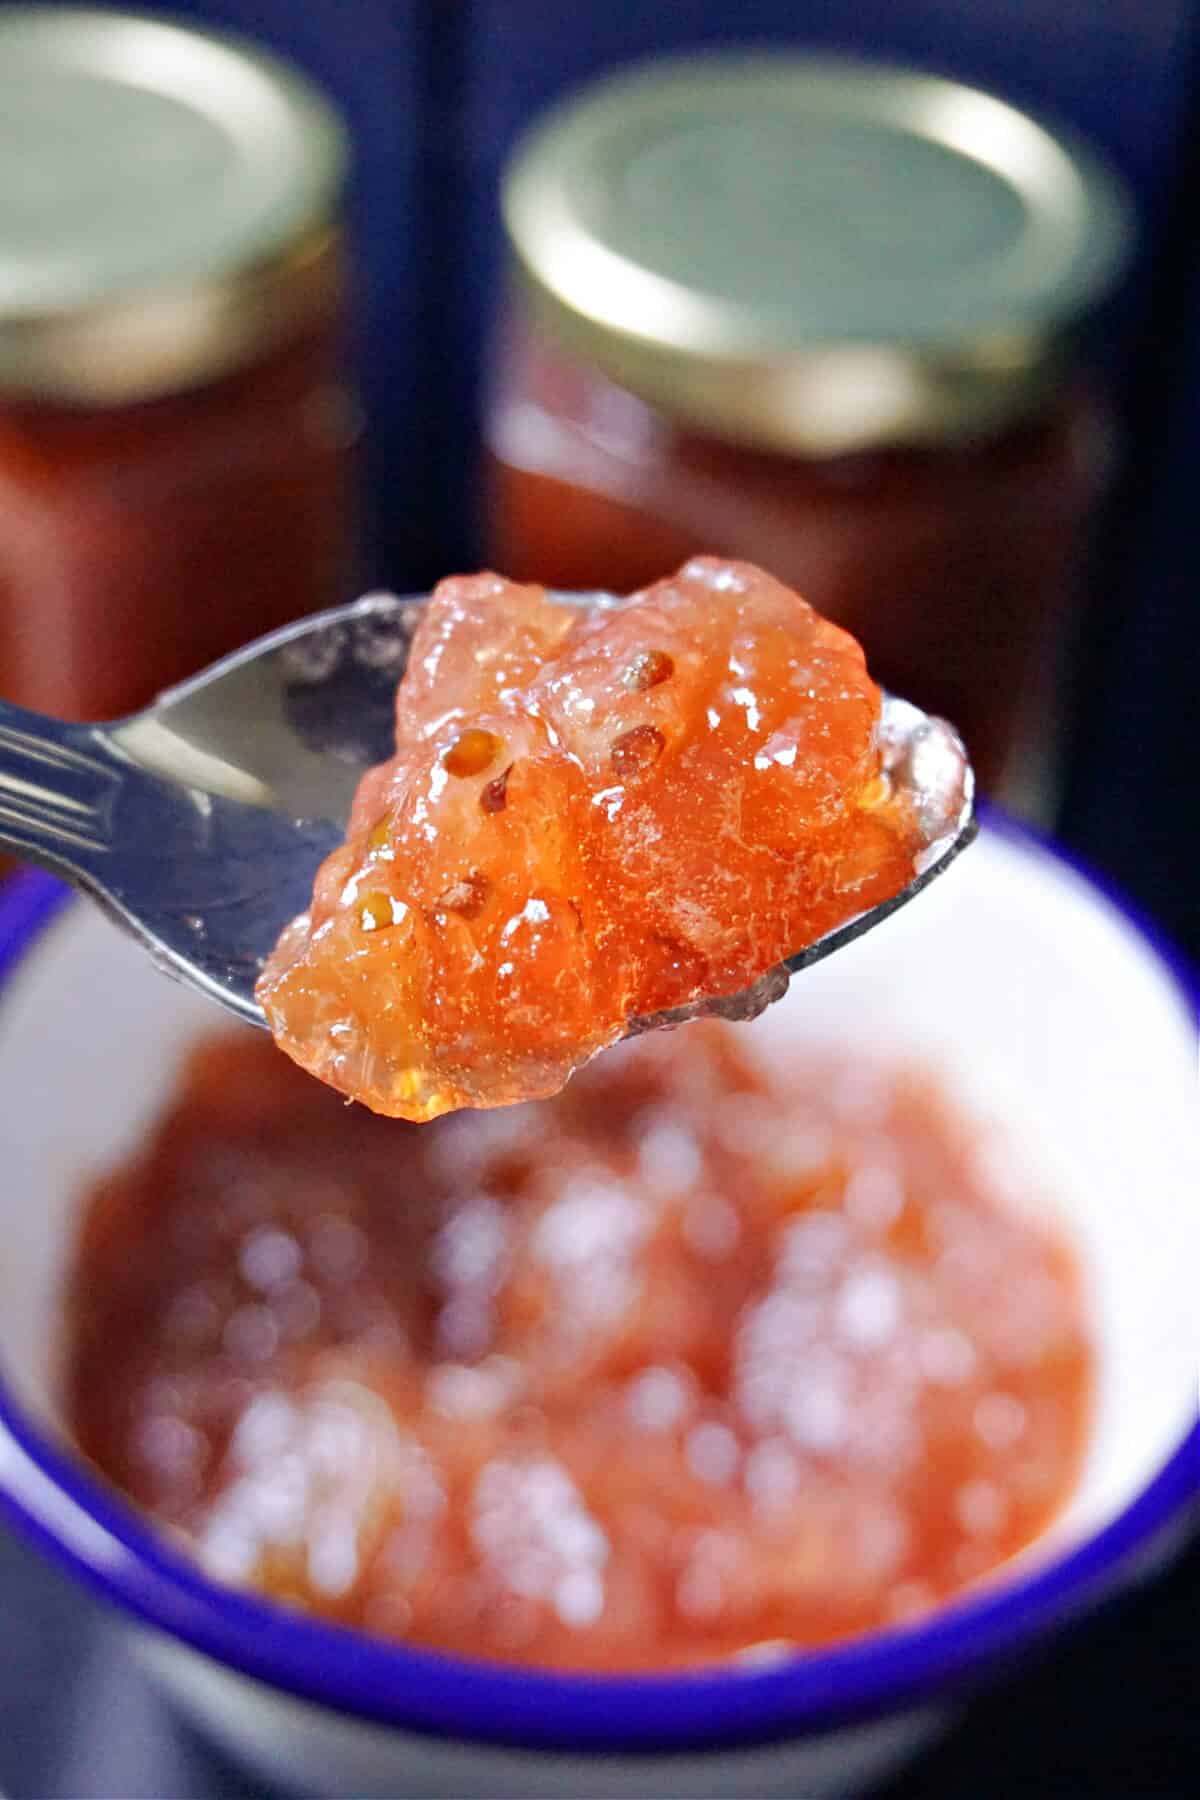 A spoonful of gooseberry jam.